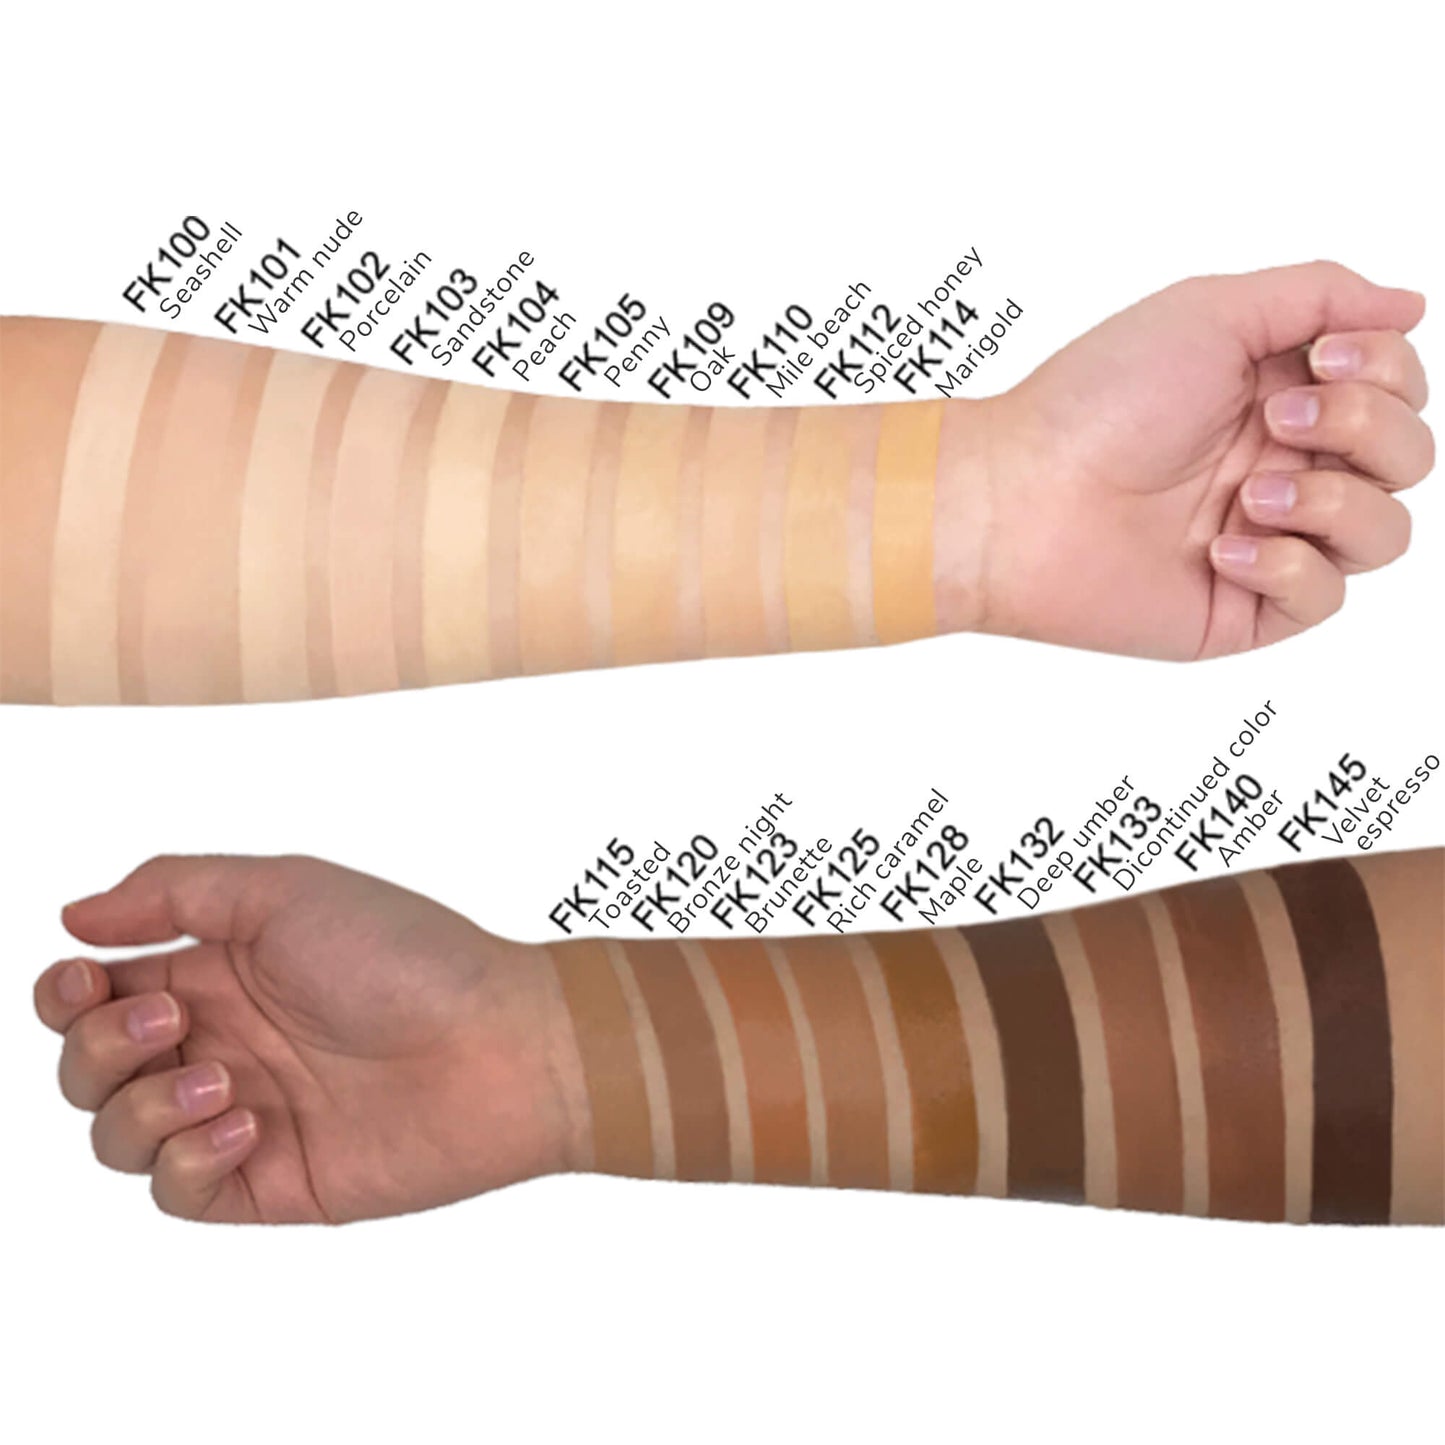 19 shades of Cruisin Organics Foundation are available at our online store.